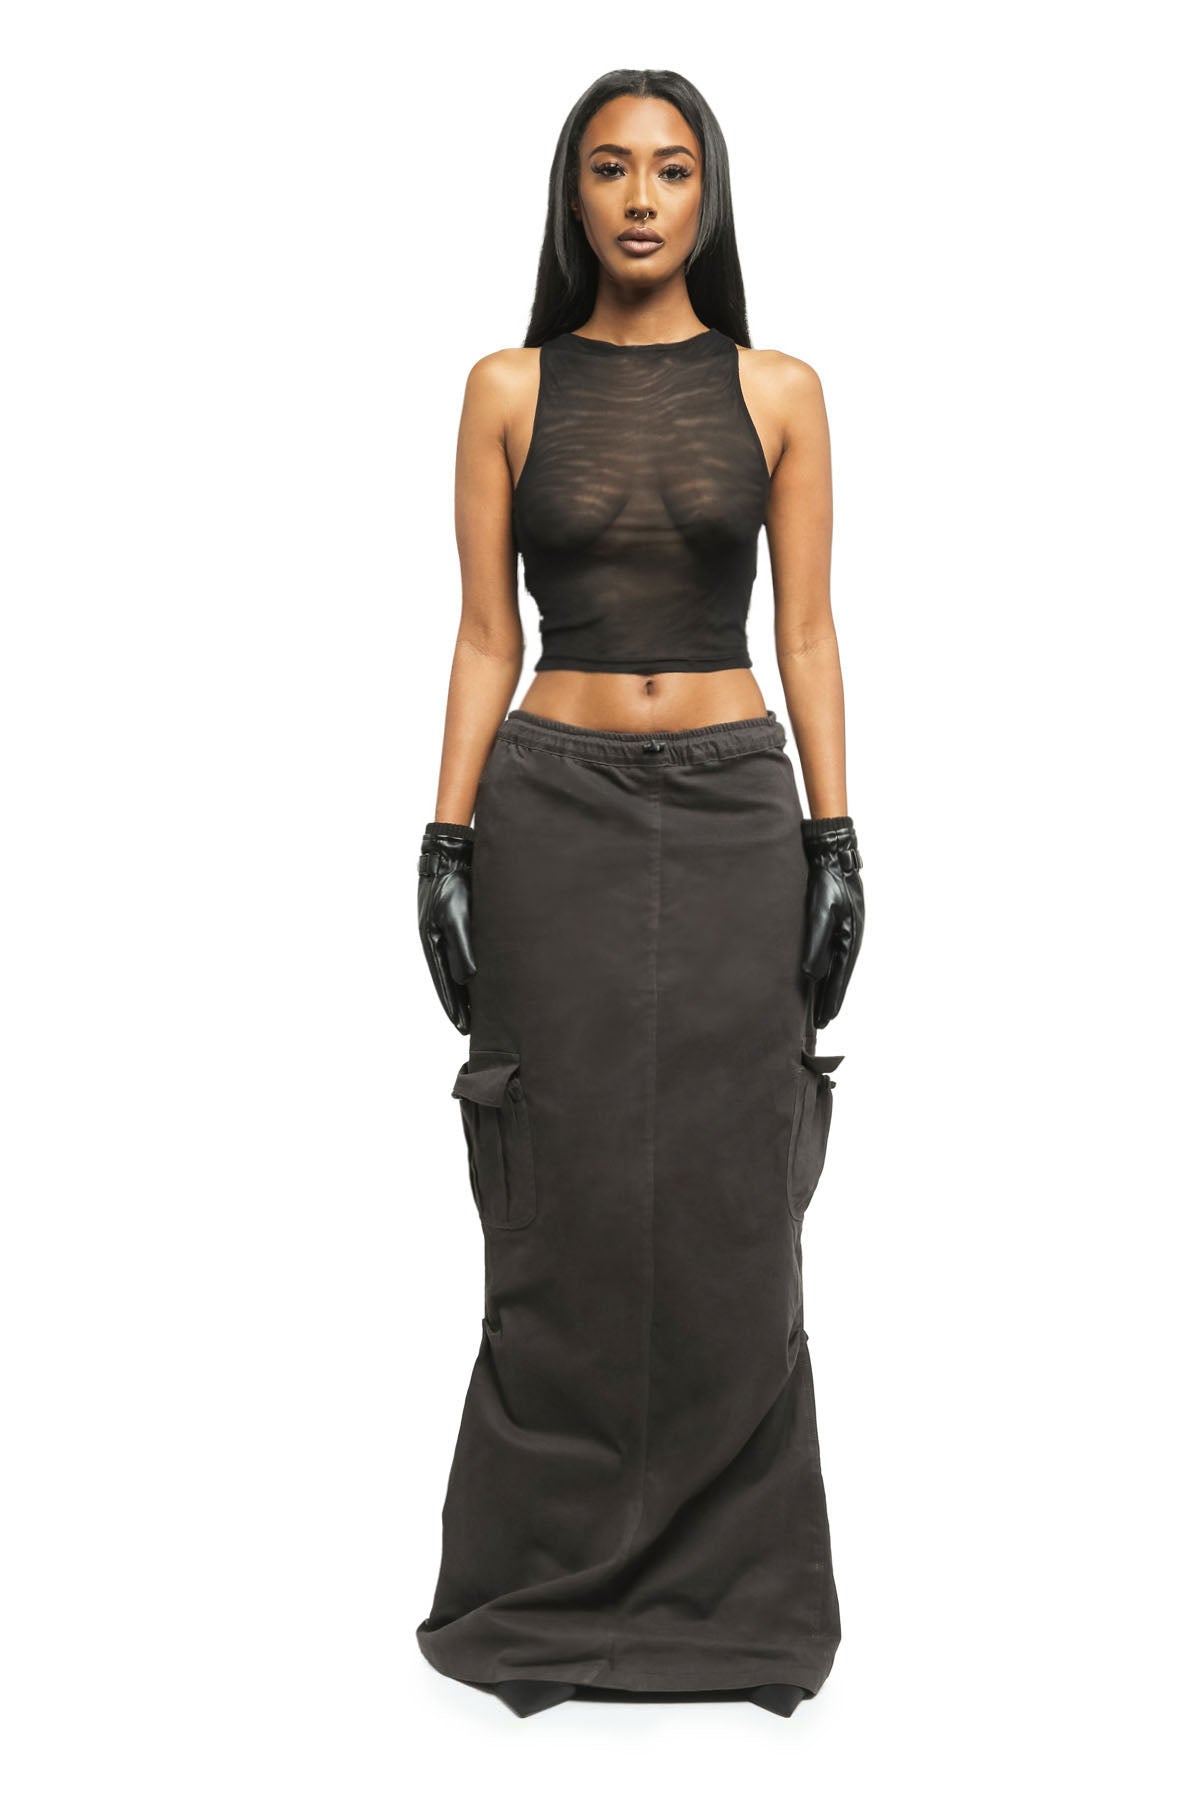 CARGO SKIRT IN CHARCOAL